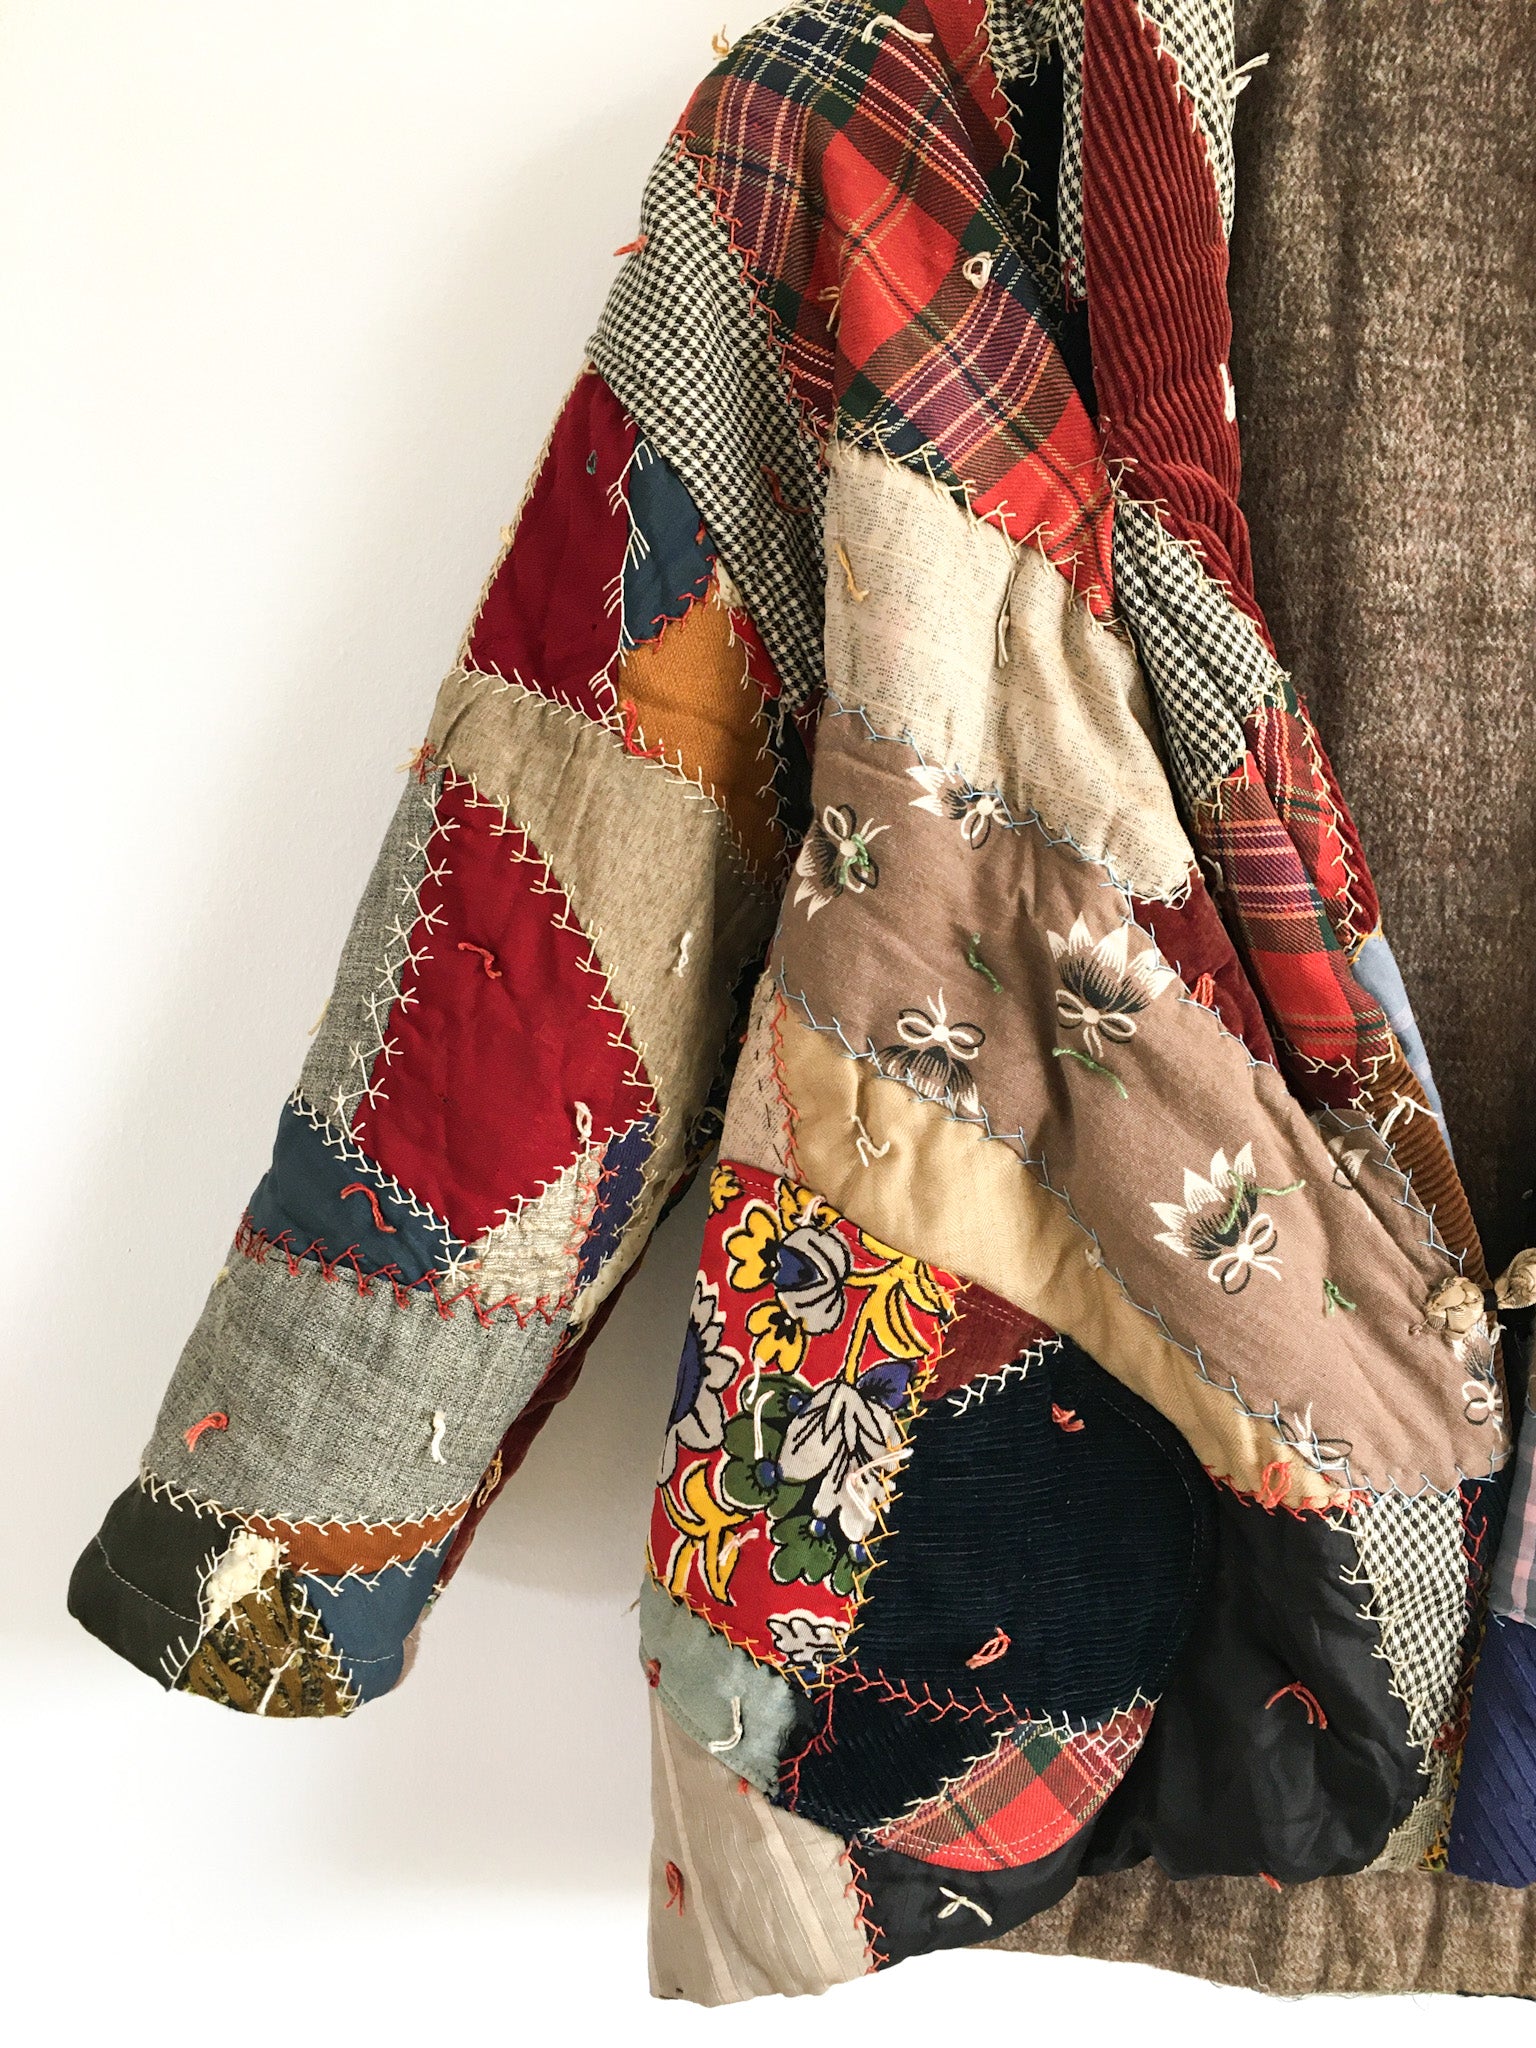 Crazy Quilt Puffy Jacket – Carny Couture